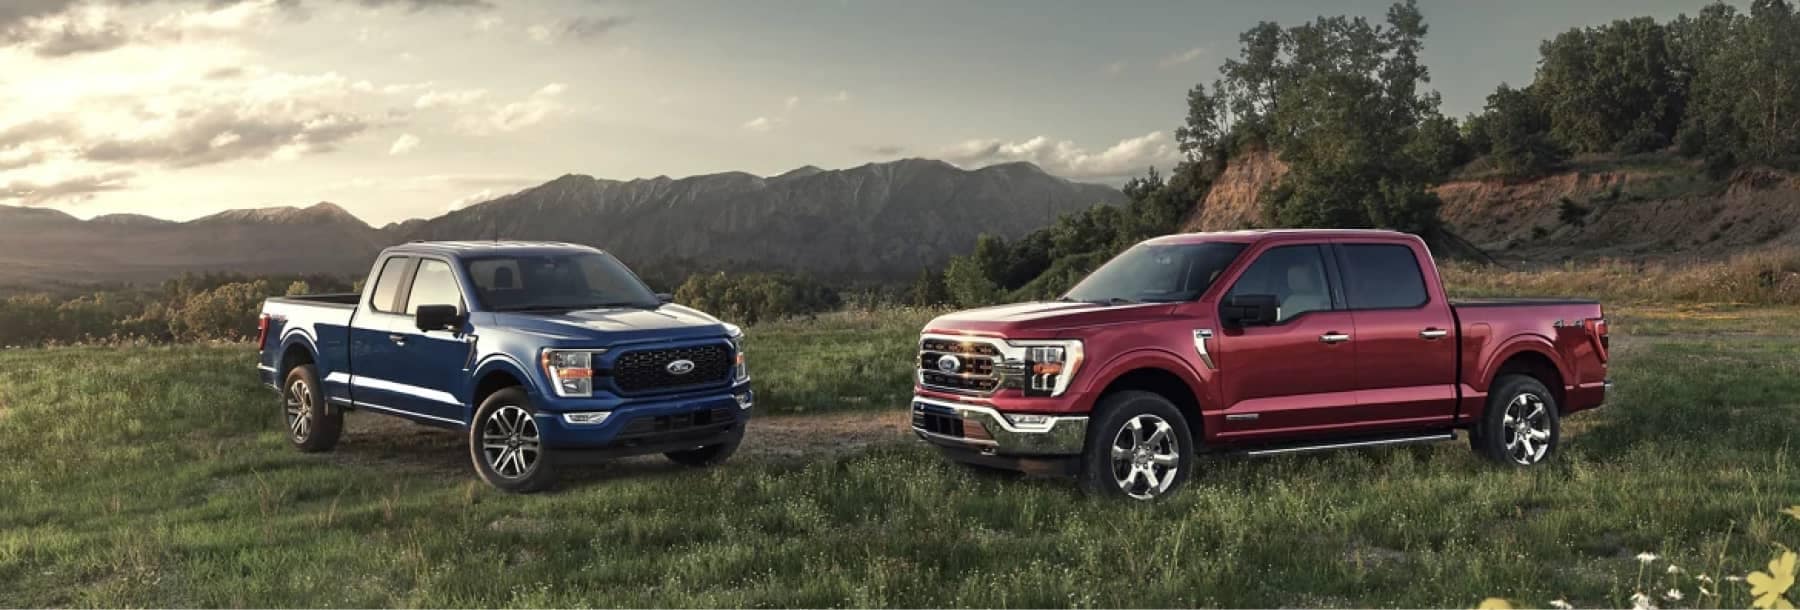 Two 2021 Ford F150 trucks in a mountain valley